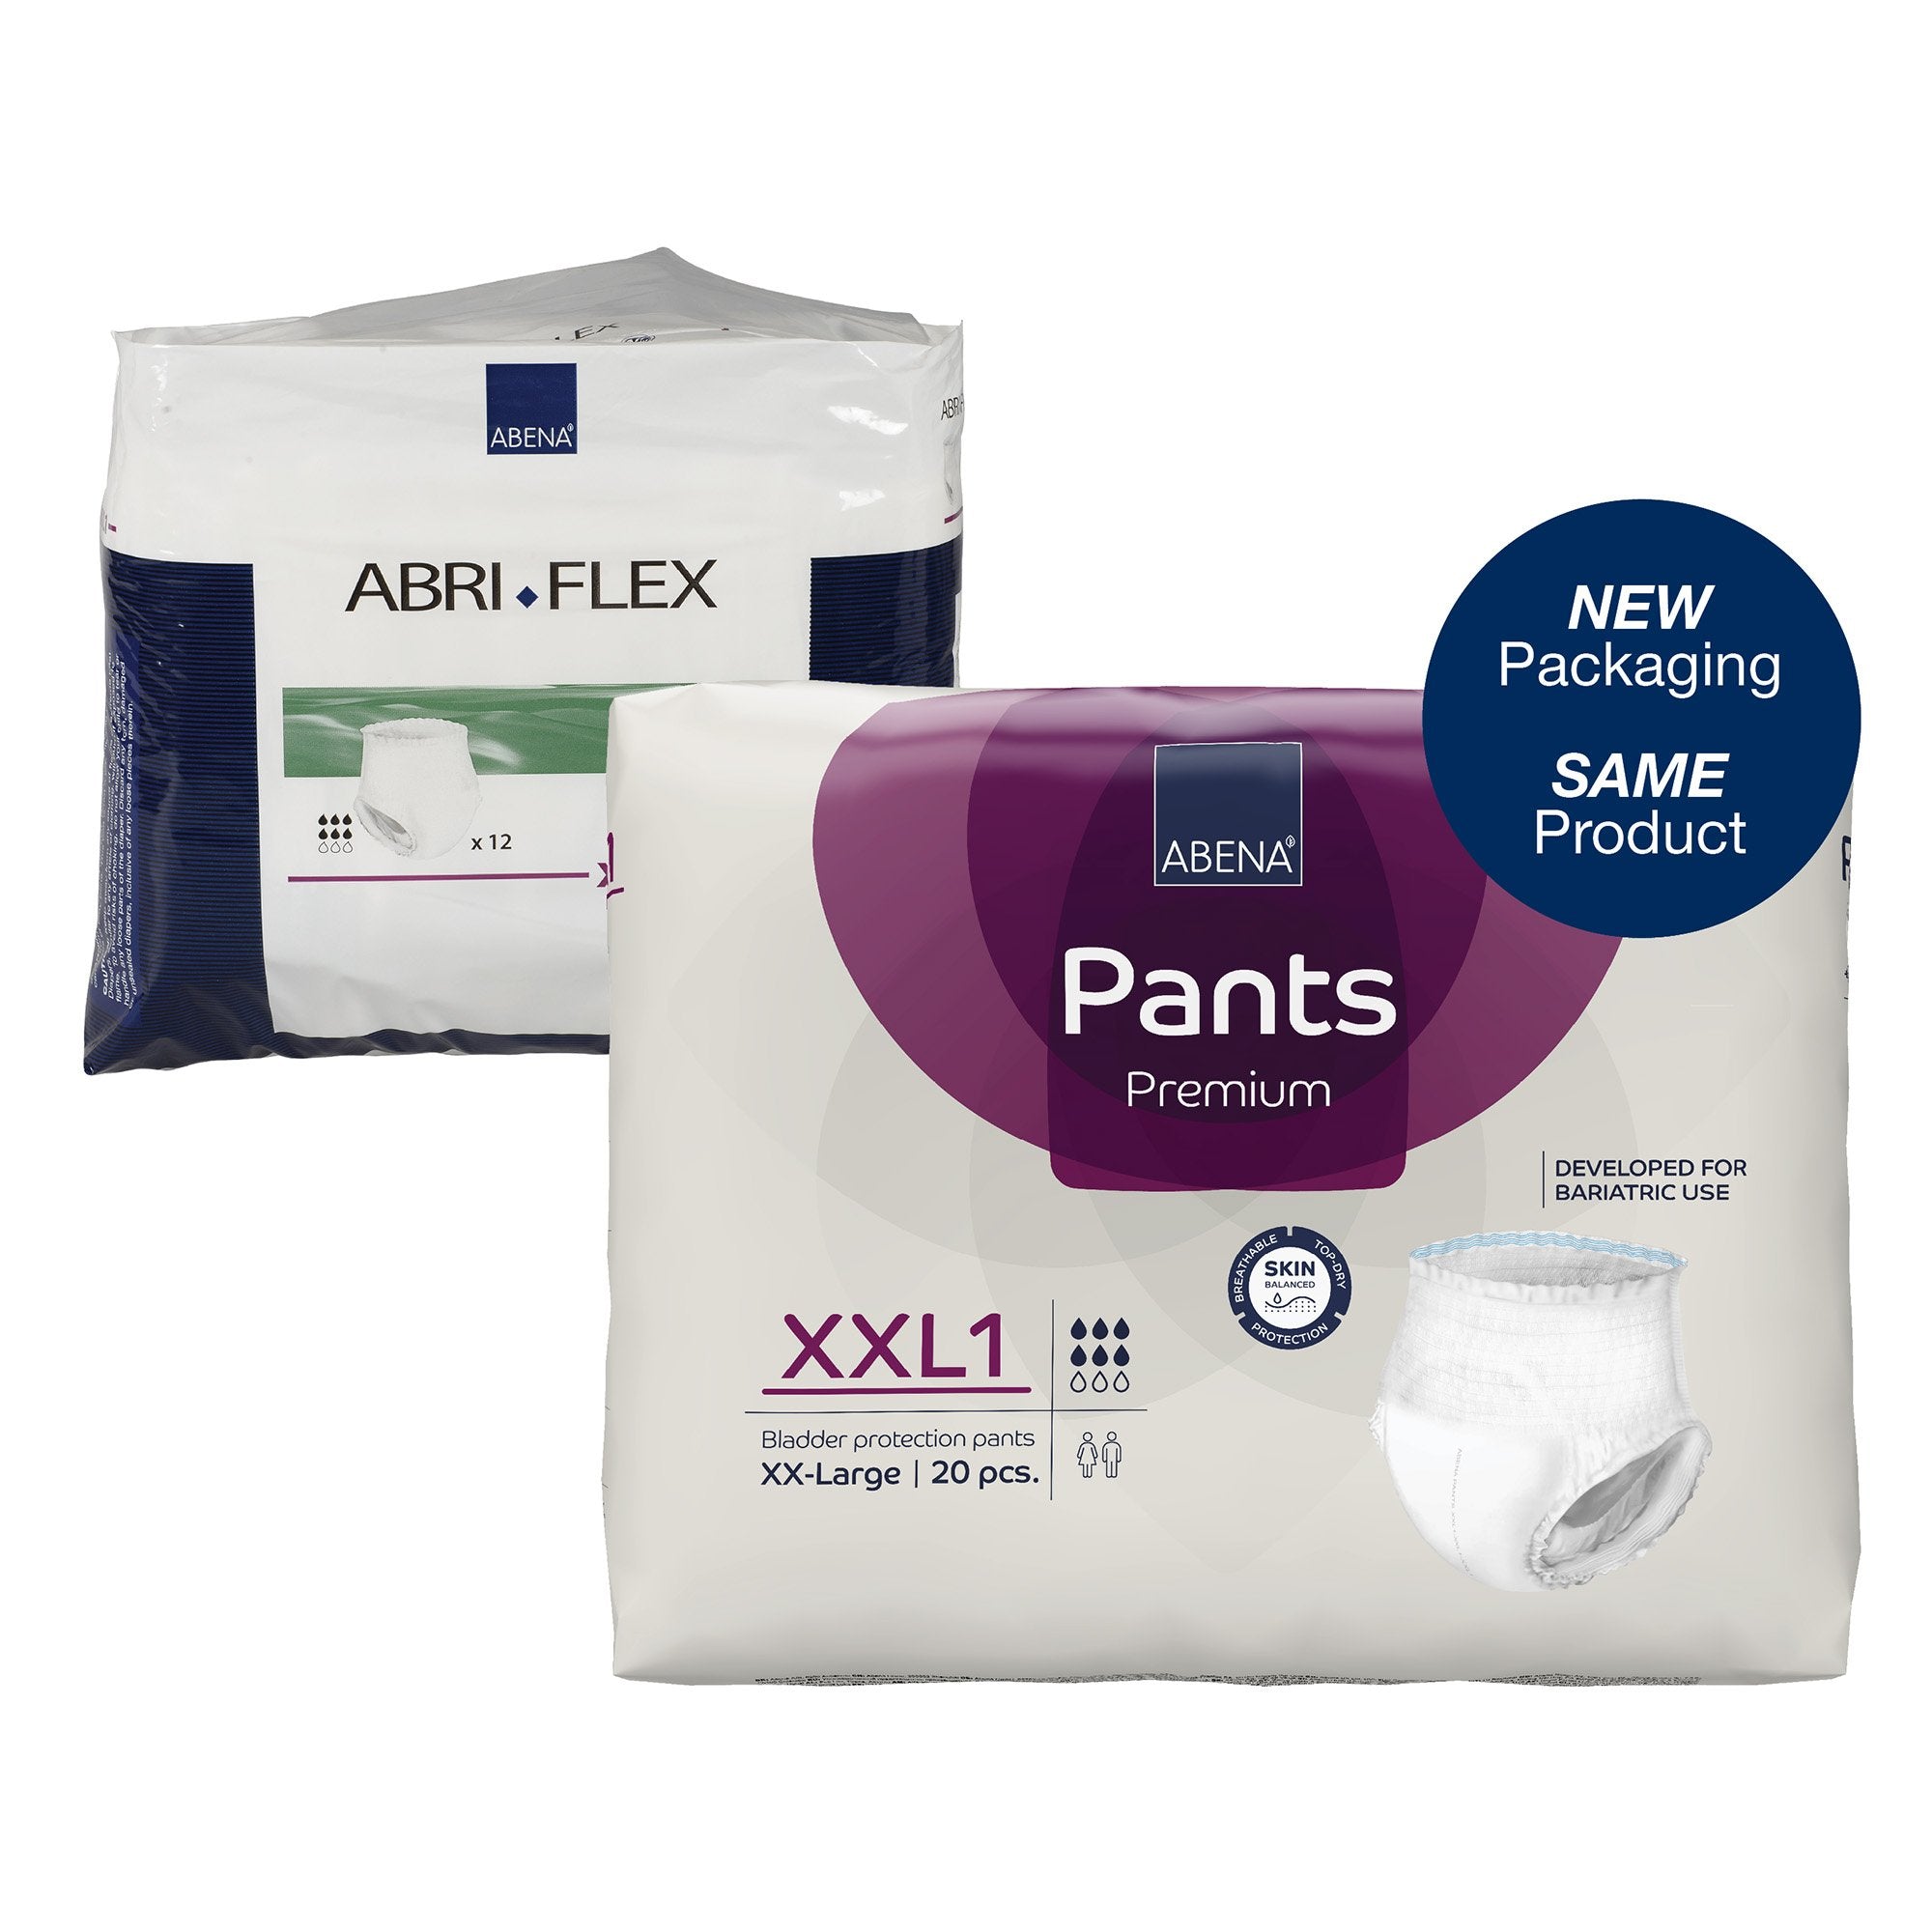 Unisex Adult Absorbent Underwear Abena Premium Pants XXL1 Pull On with Tear Away Seams 2X-Large Disposable Moderate Absorbency